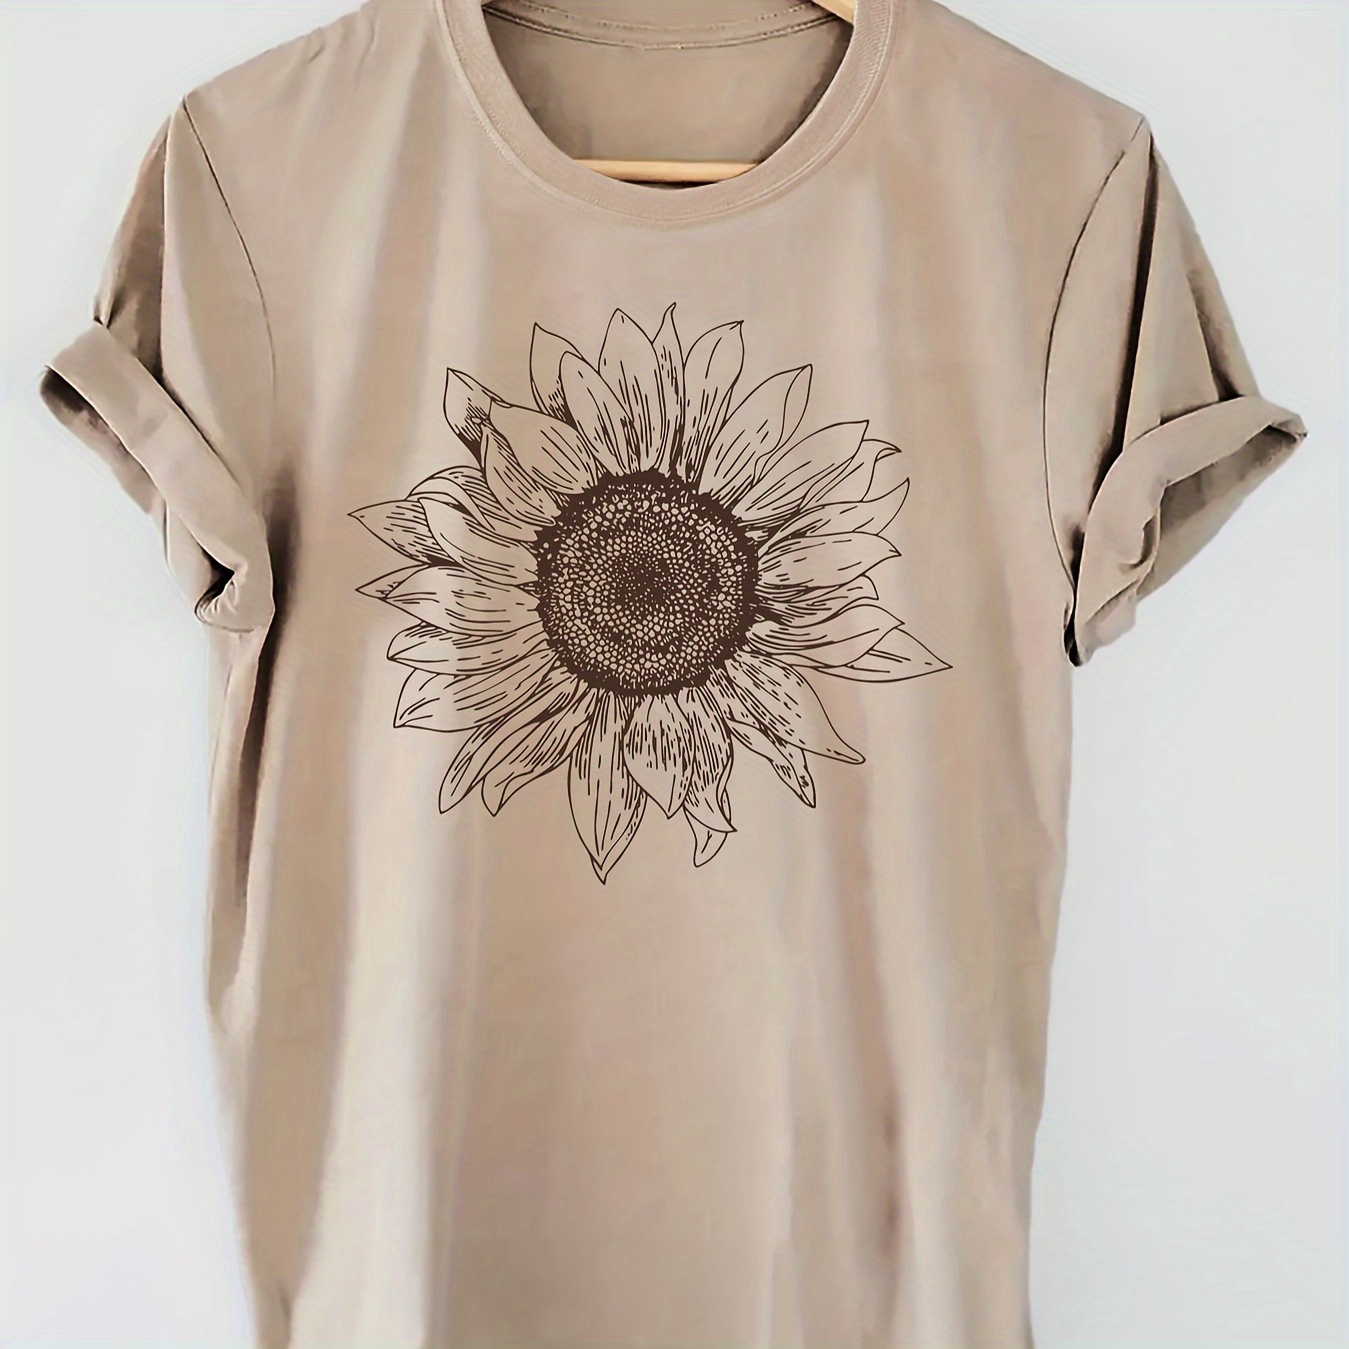 

Sunflower Print T-shirt, Short Sleeve Crew Neck Casual Top For Summer & Spring, Women's Clothing